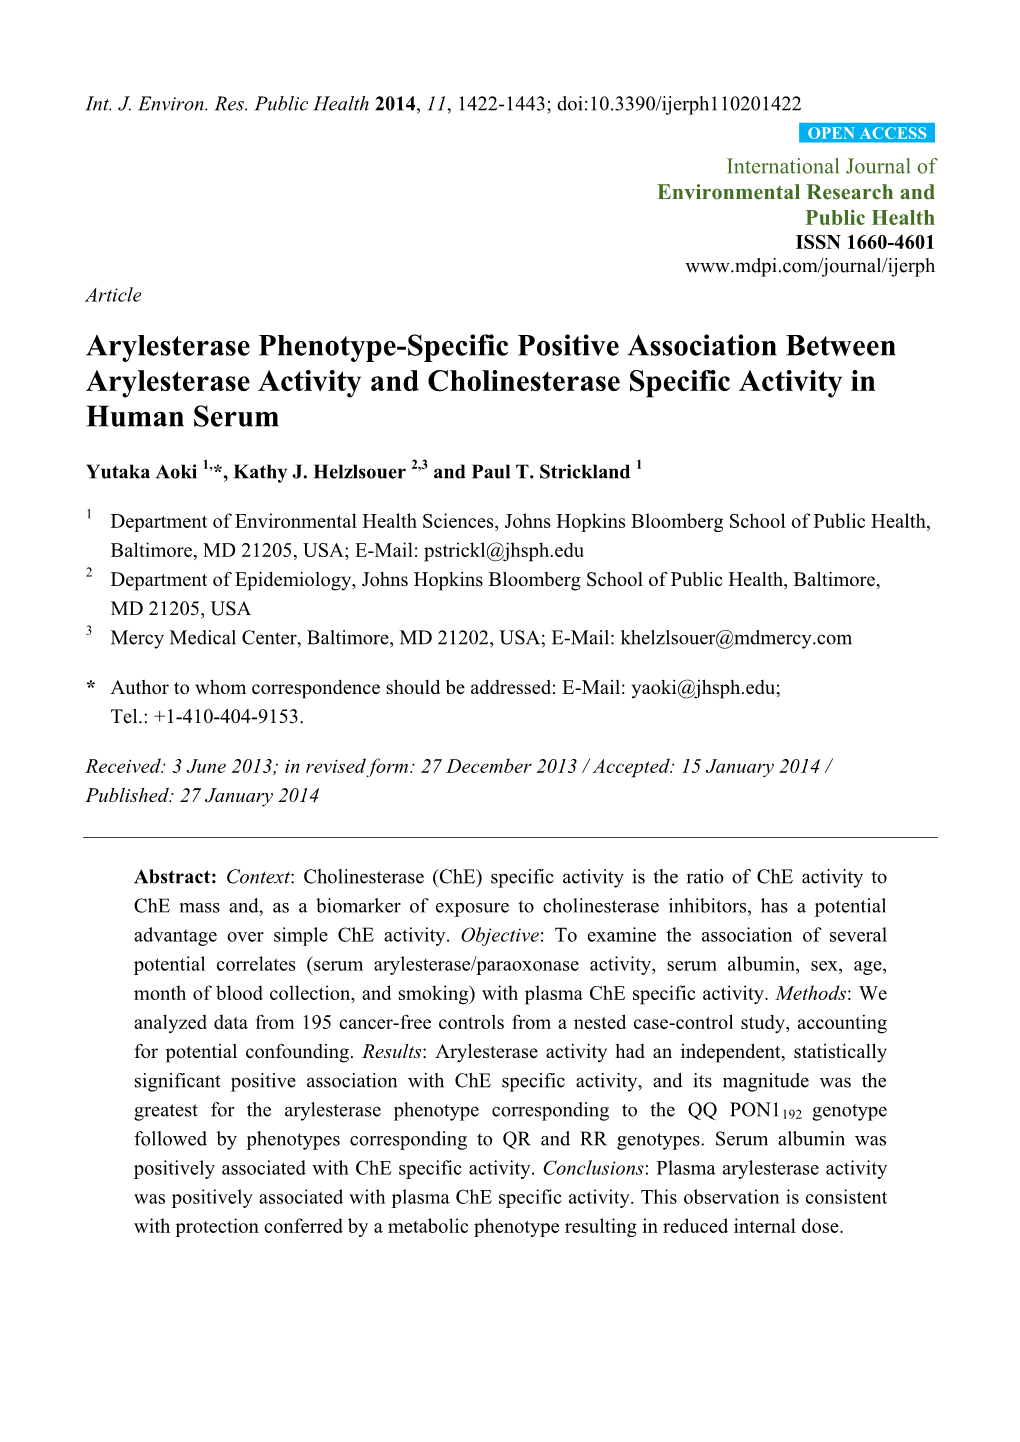 Arylesterase Phenotype-Specific Positive Association Between Arylesterase Activity and Cholinesterase Specific Activity in Human Serum